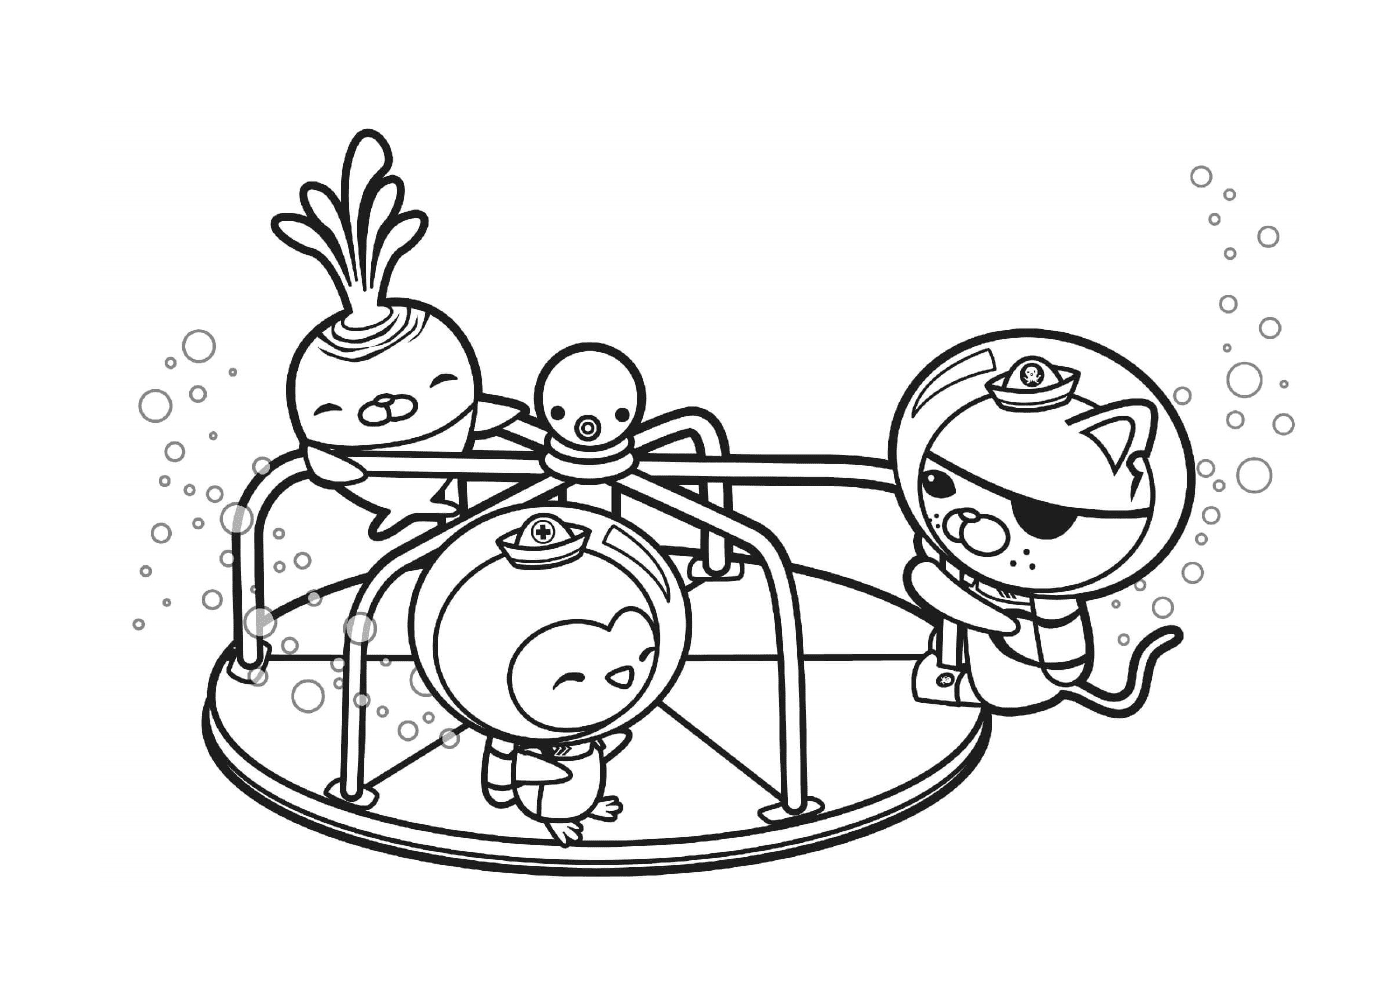 friends are found on a merry go round octonauts